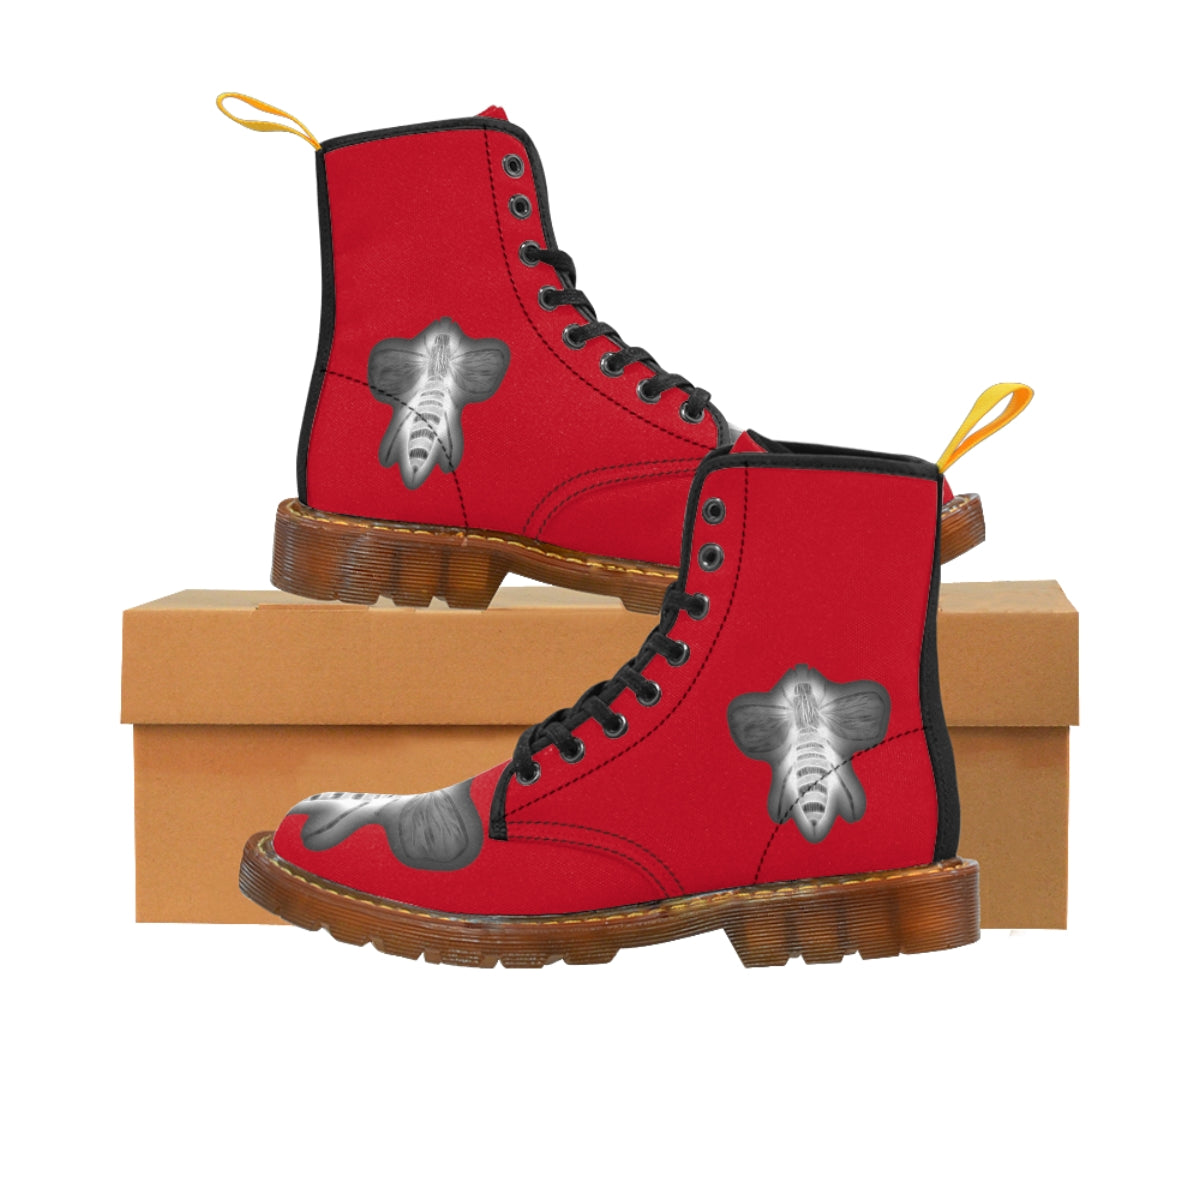 Negative Bee Men's Red Canvas Boots Shoes Bee boots combat boots fun mens boots Mens boots mens fashion boots Negative Bee red mens boots Shoes unique mens boots vegan boots vegan combat boots